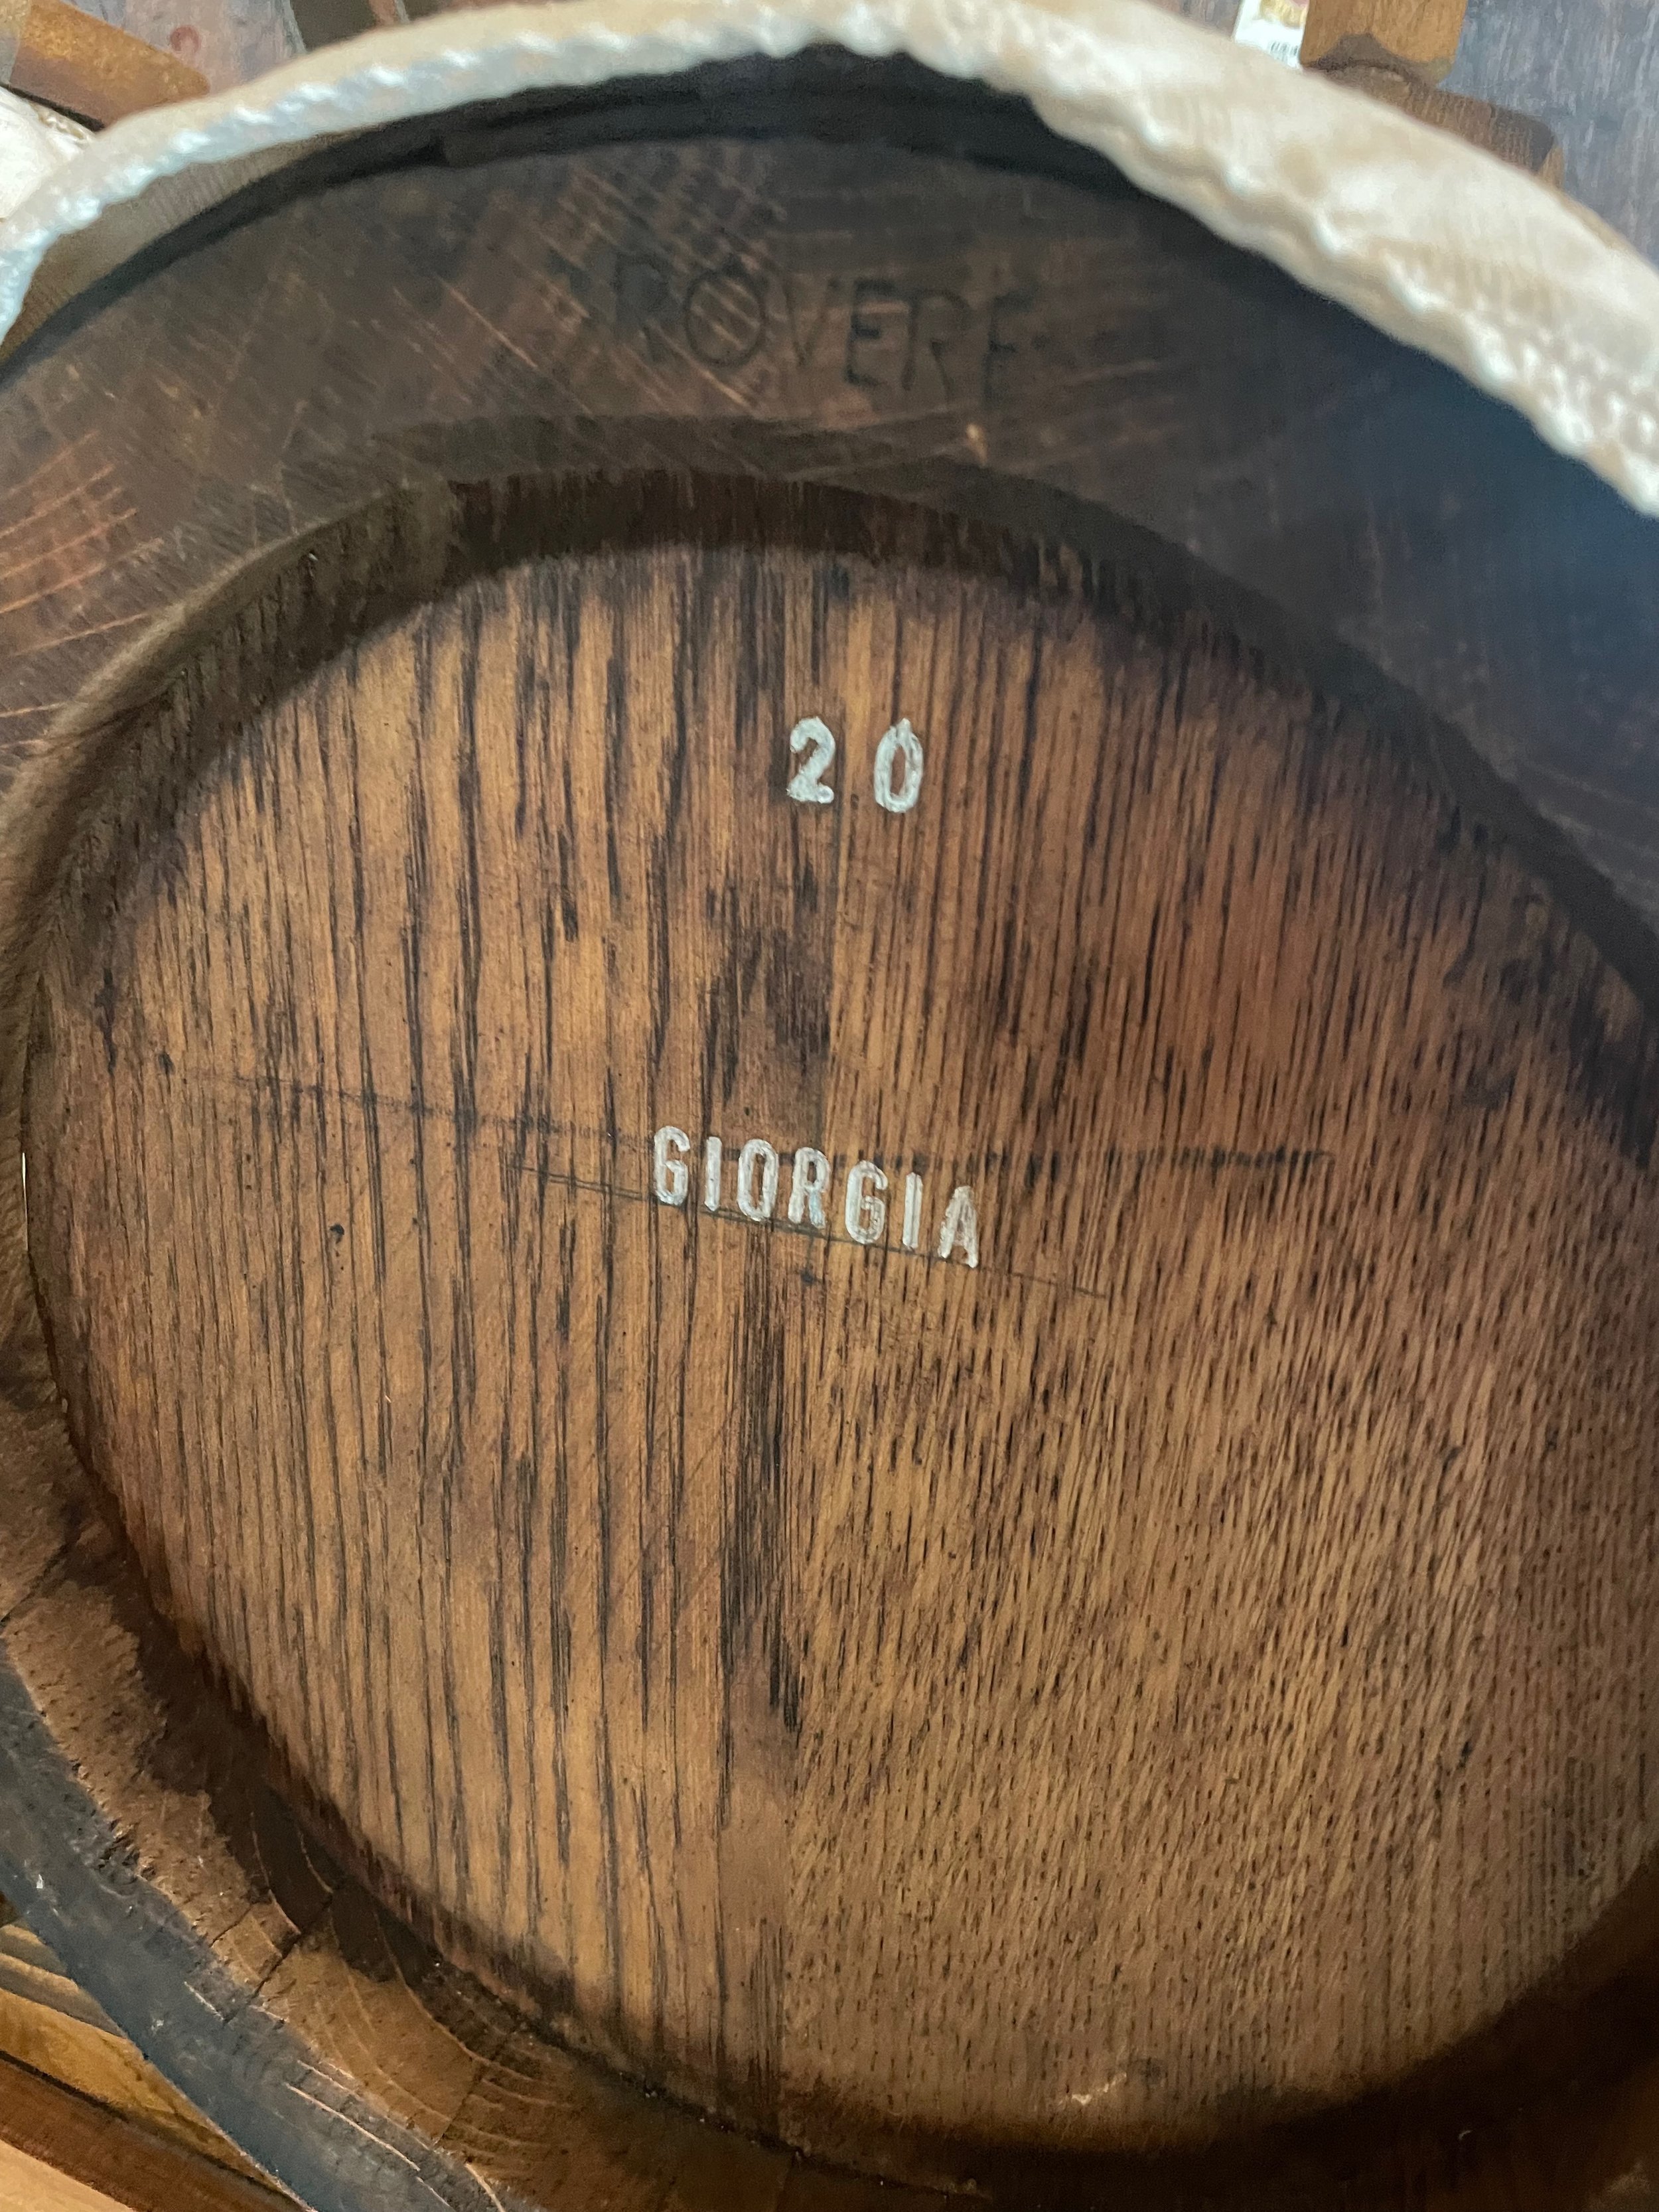 Her name is engraved on each barrel.